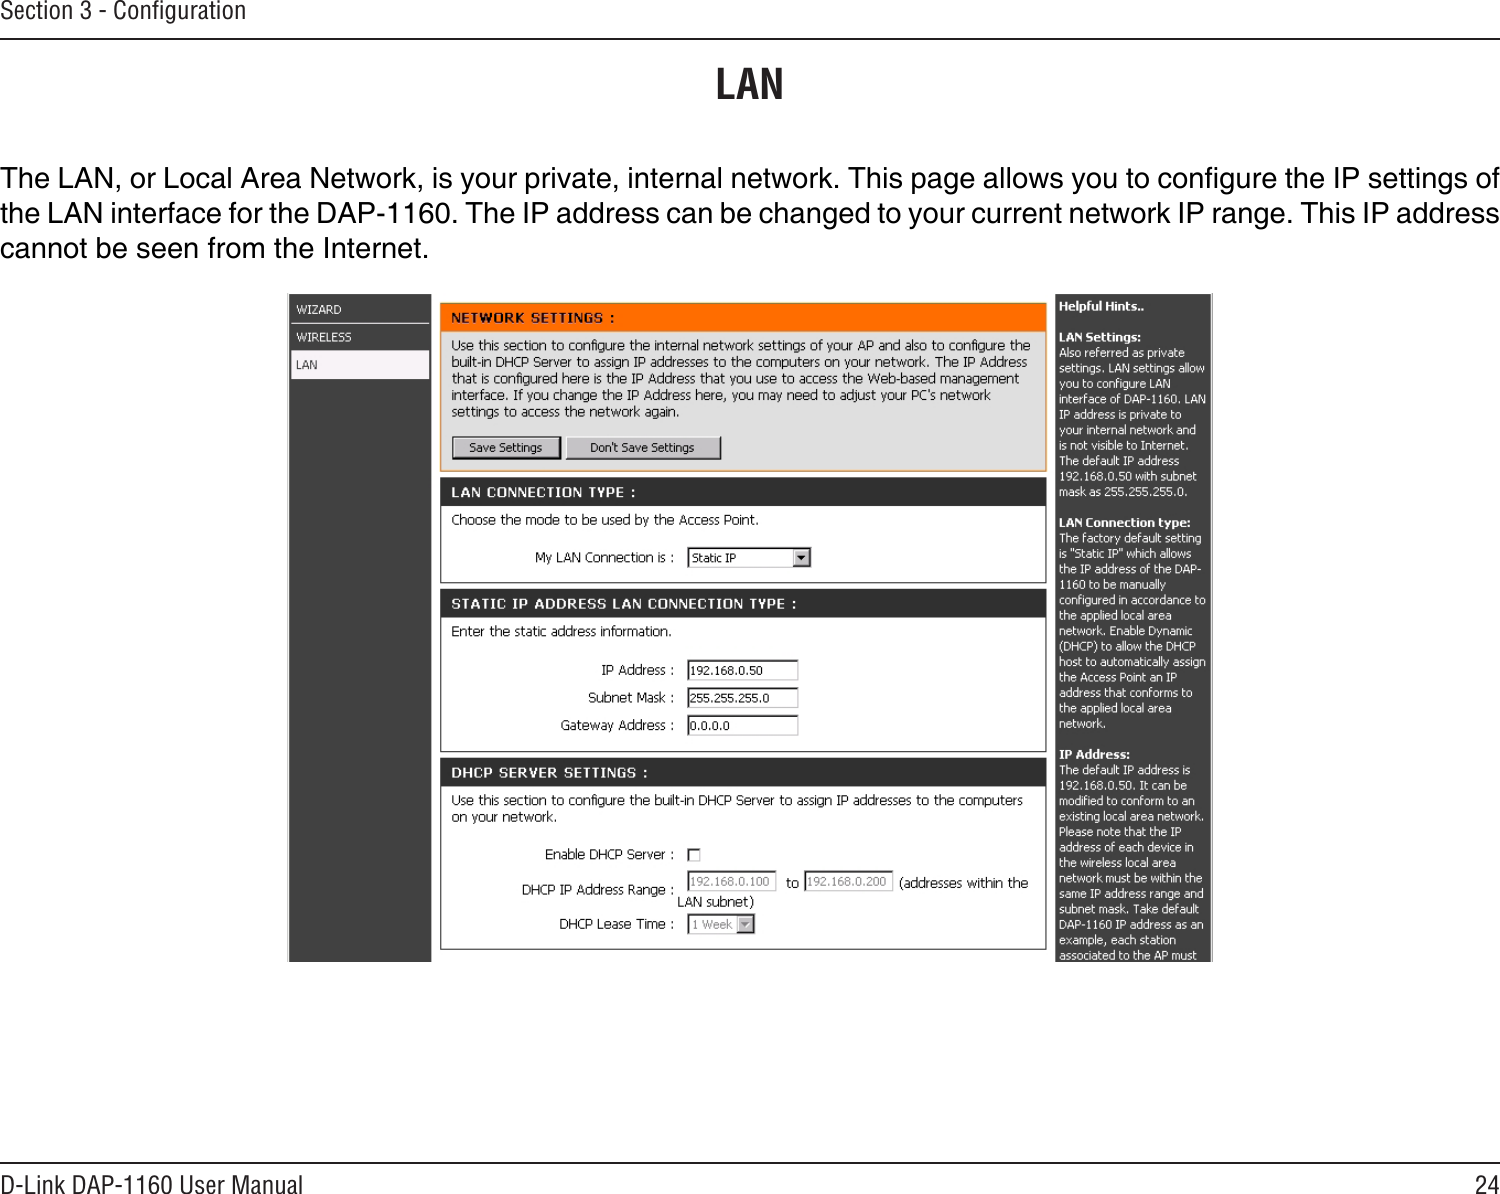 24D-Link DAP-1160 User ManualSection 3 - ConﬁgurationLANThe LAN, or Local Area Network, is your private, internal network. This page allows you to congure the IP settings of the LAN interface for the DAP-1160. The IP address can be changed to your current network IP range. This IP address cannot be seen from the Internet.